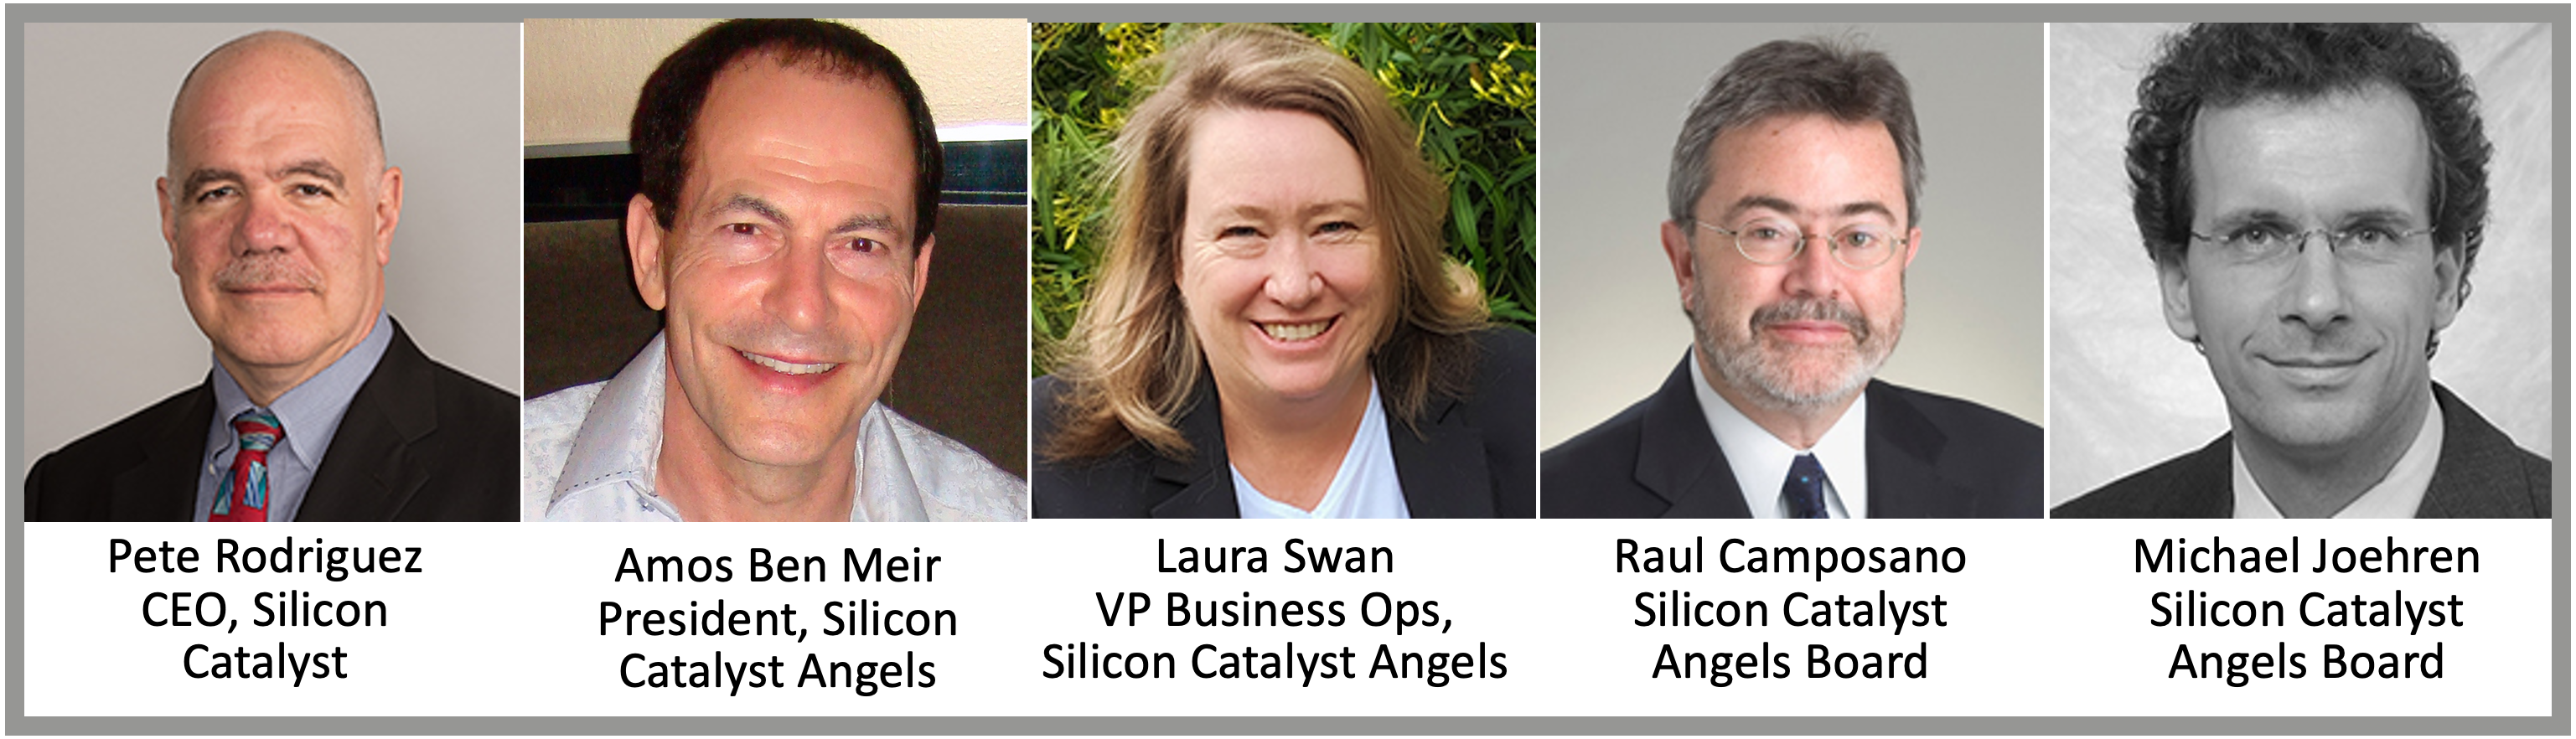 Silicon Catalyst Angels Team